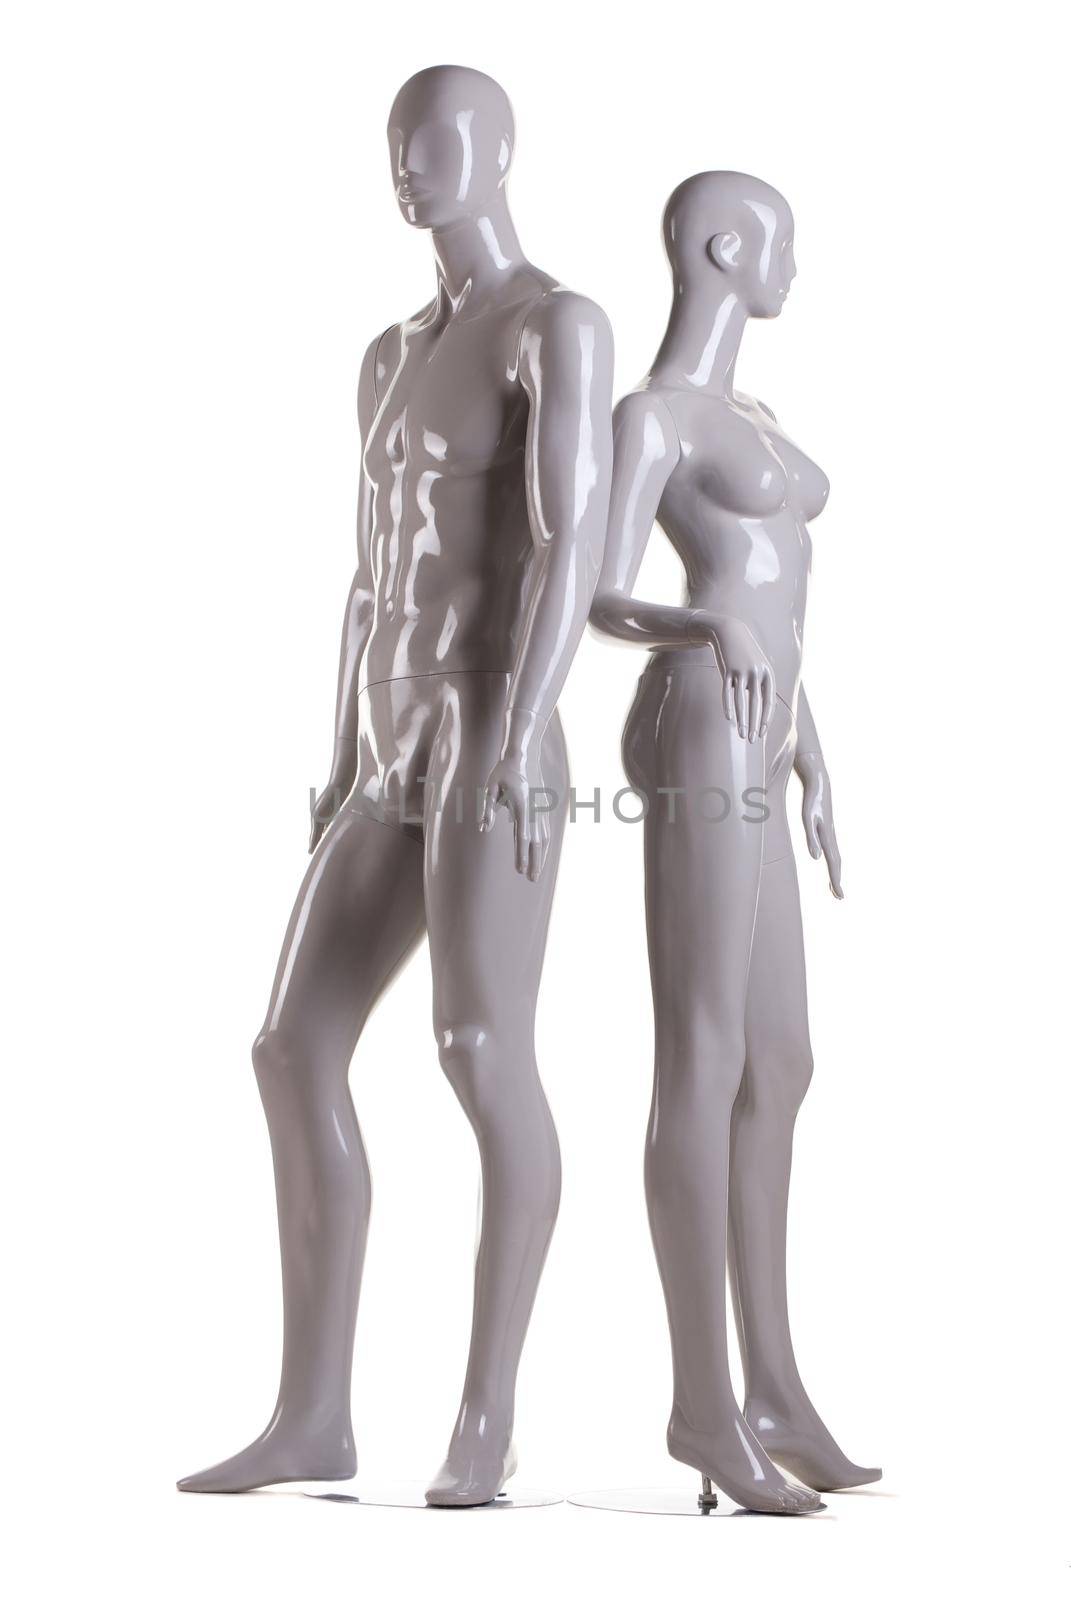 Couple of male and a female fashion mannequin on white background